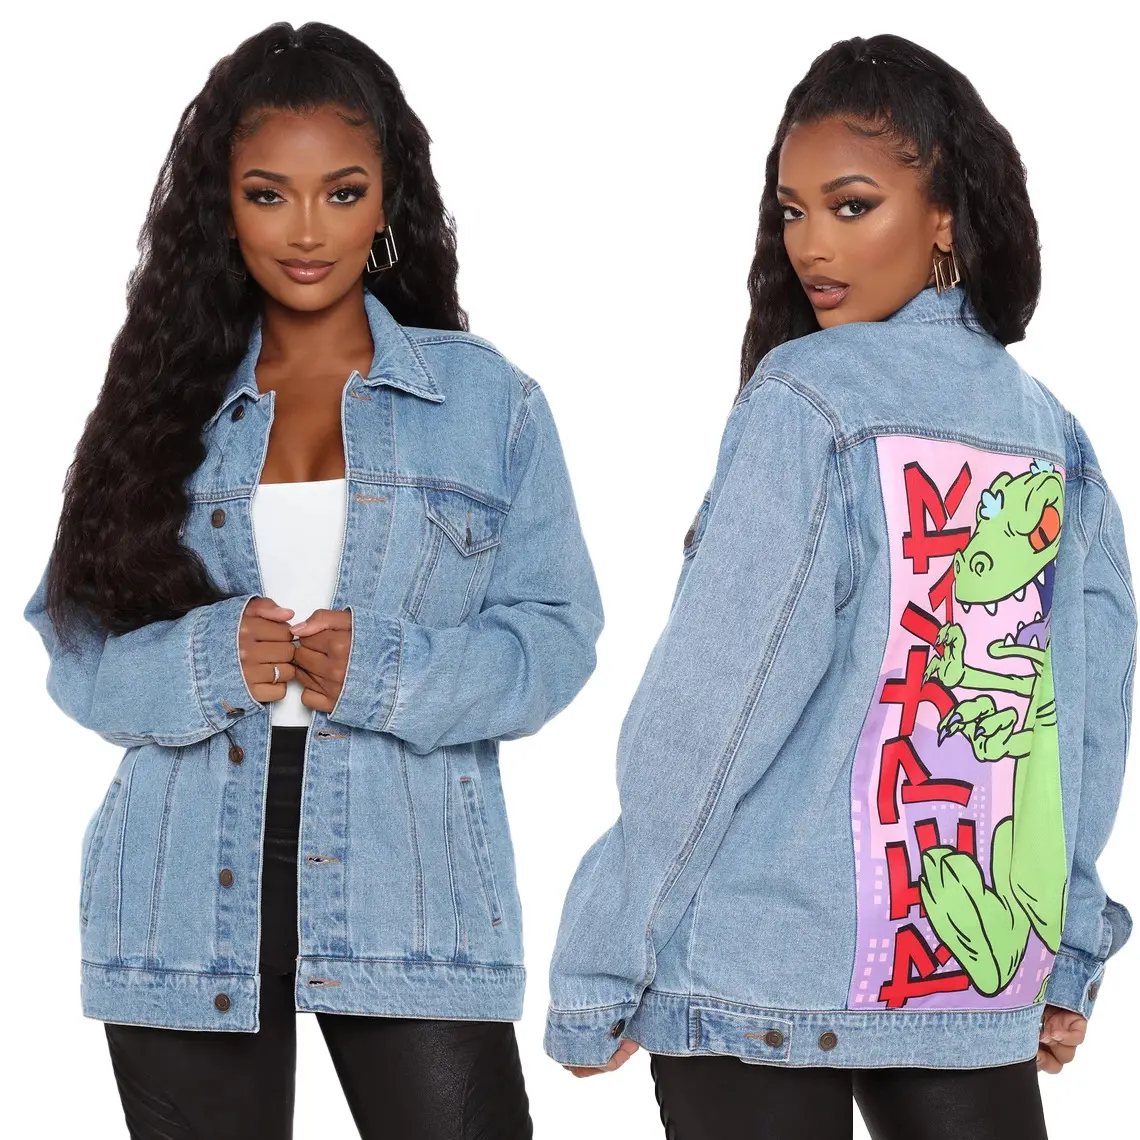 2020 European and American trend printing hot sale sexy fashionable women's denim jacket